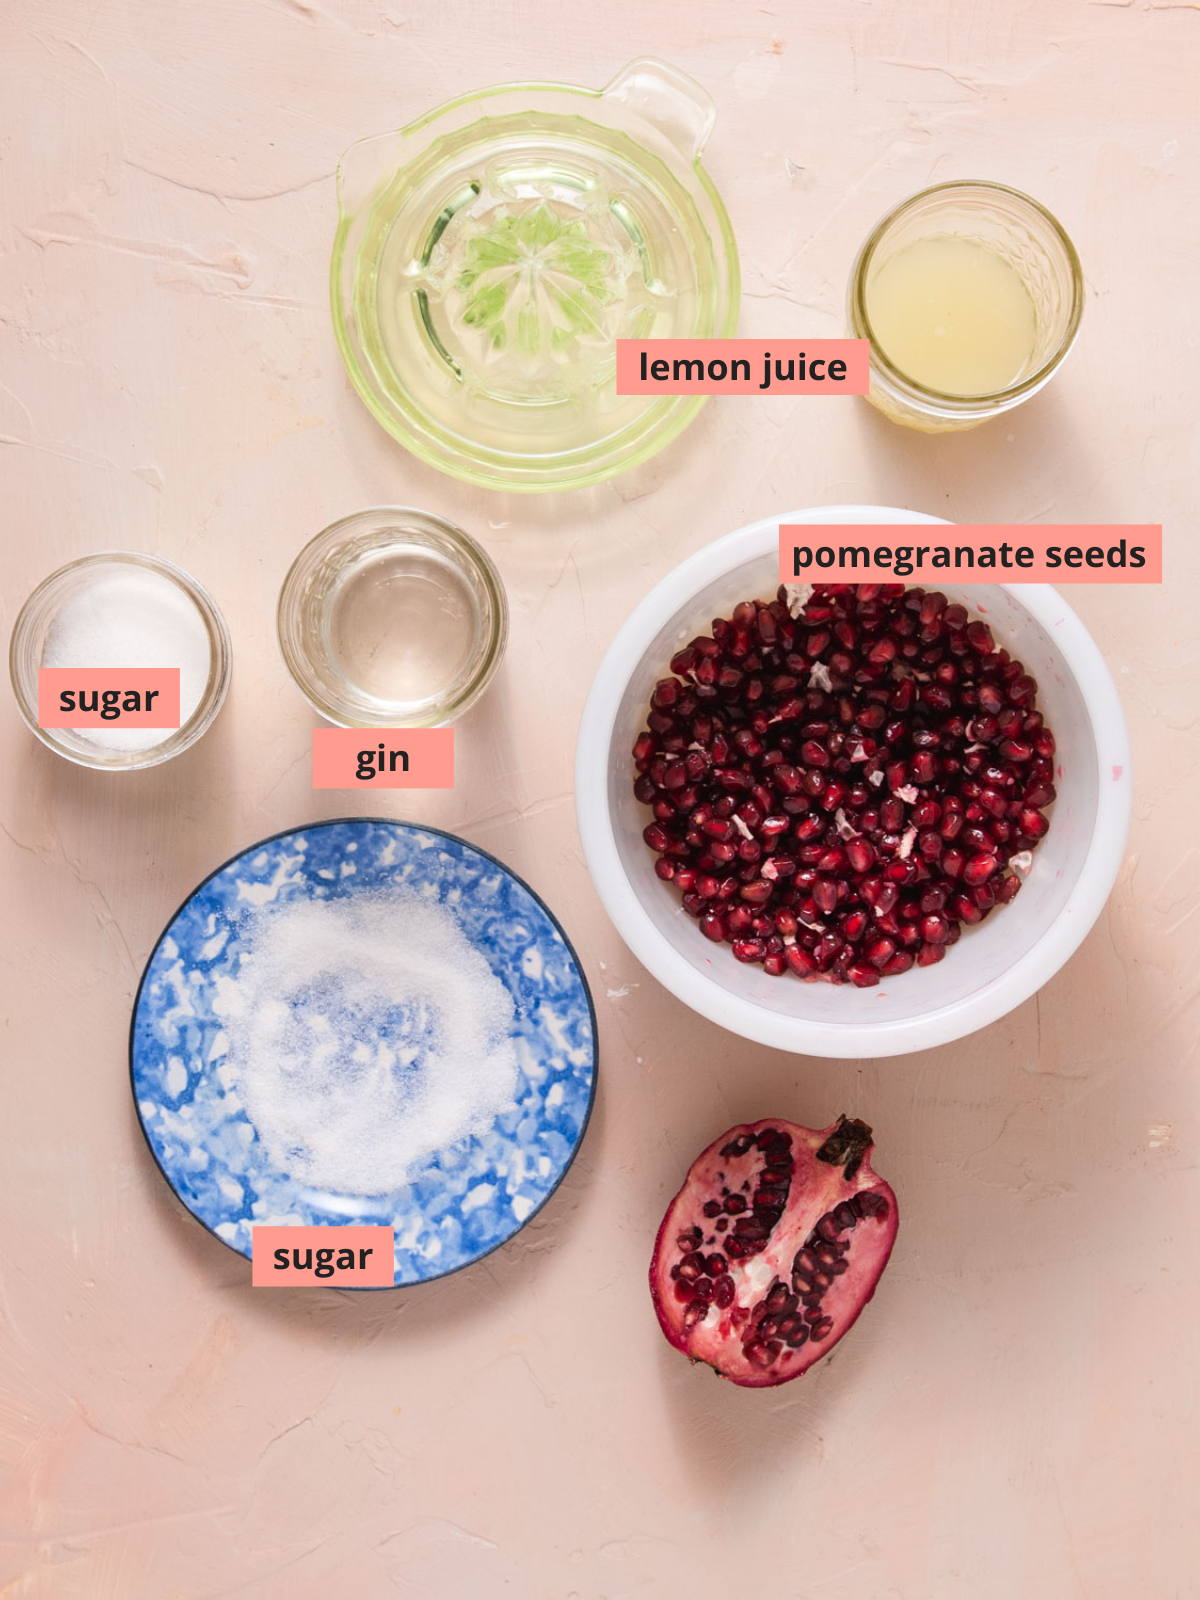 Labeled ingredients used to make pomegranate cocktails.